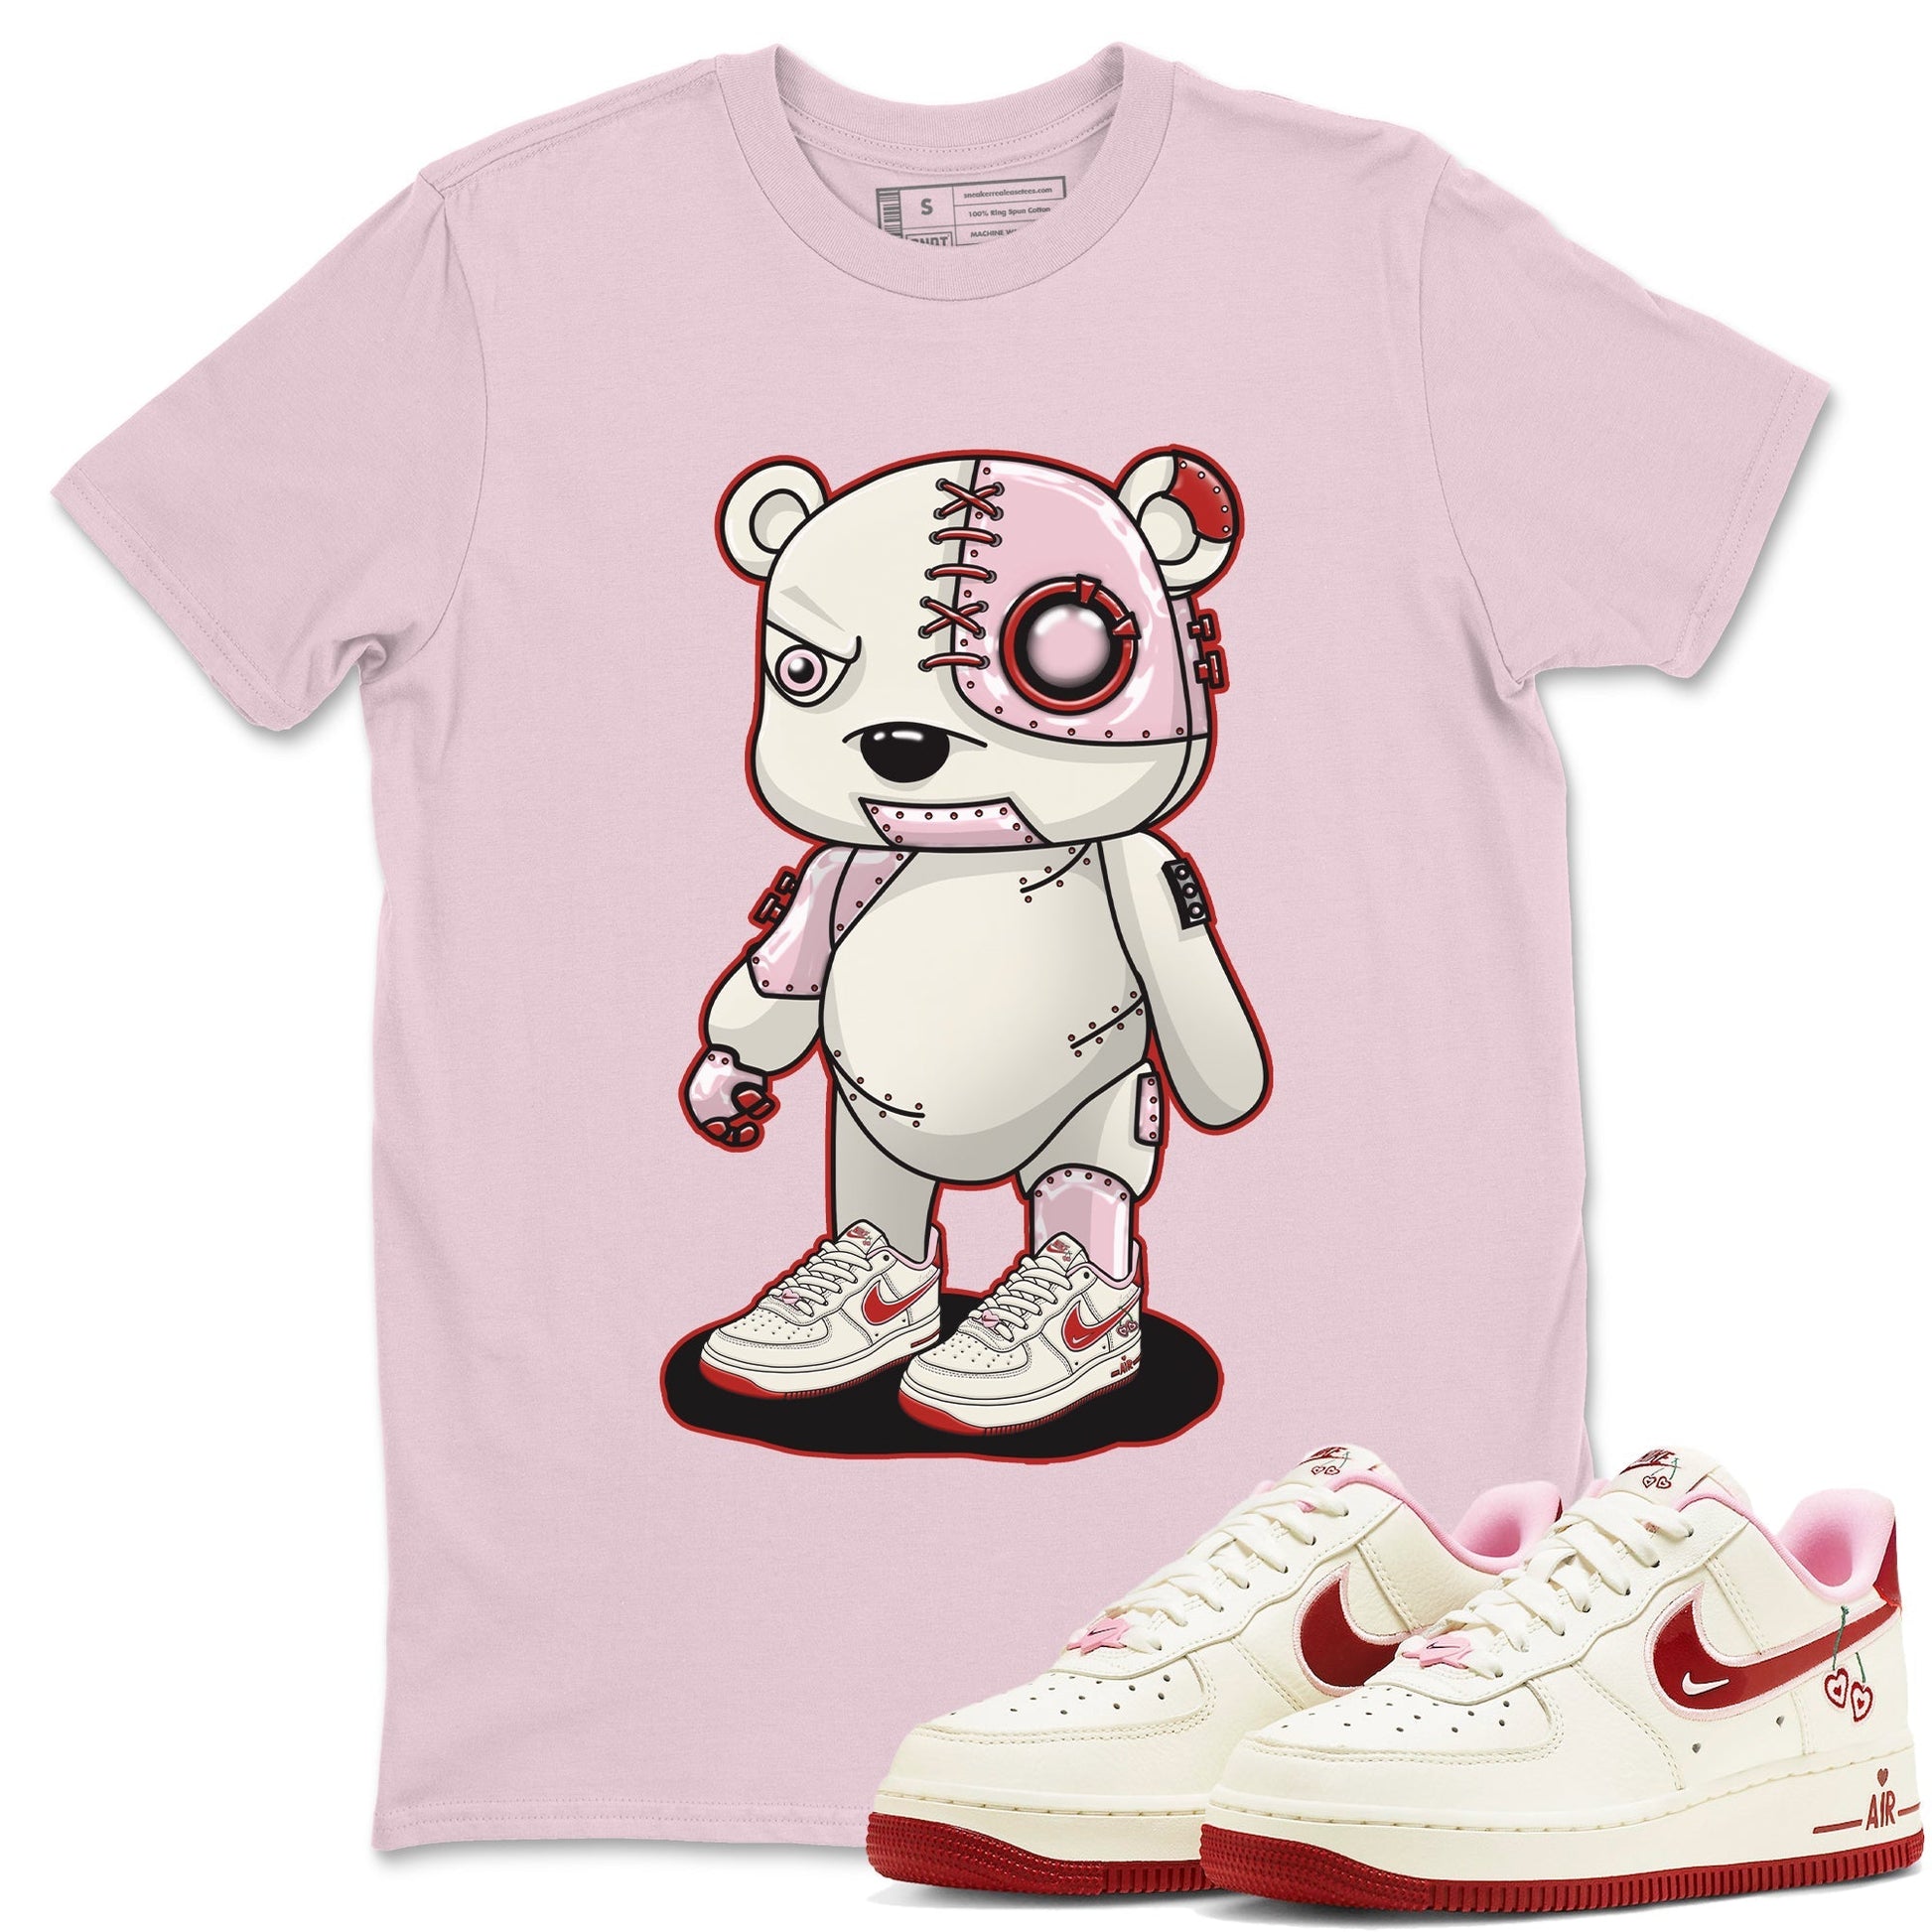 Air Force 1 Valentines Day Sneaker Match Tees Cyborg Bear Sneaker Tees Air Force 1 Valentines Day Sneaker Release Tees Unisex Shirts